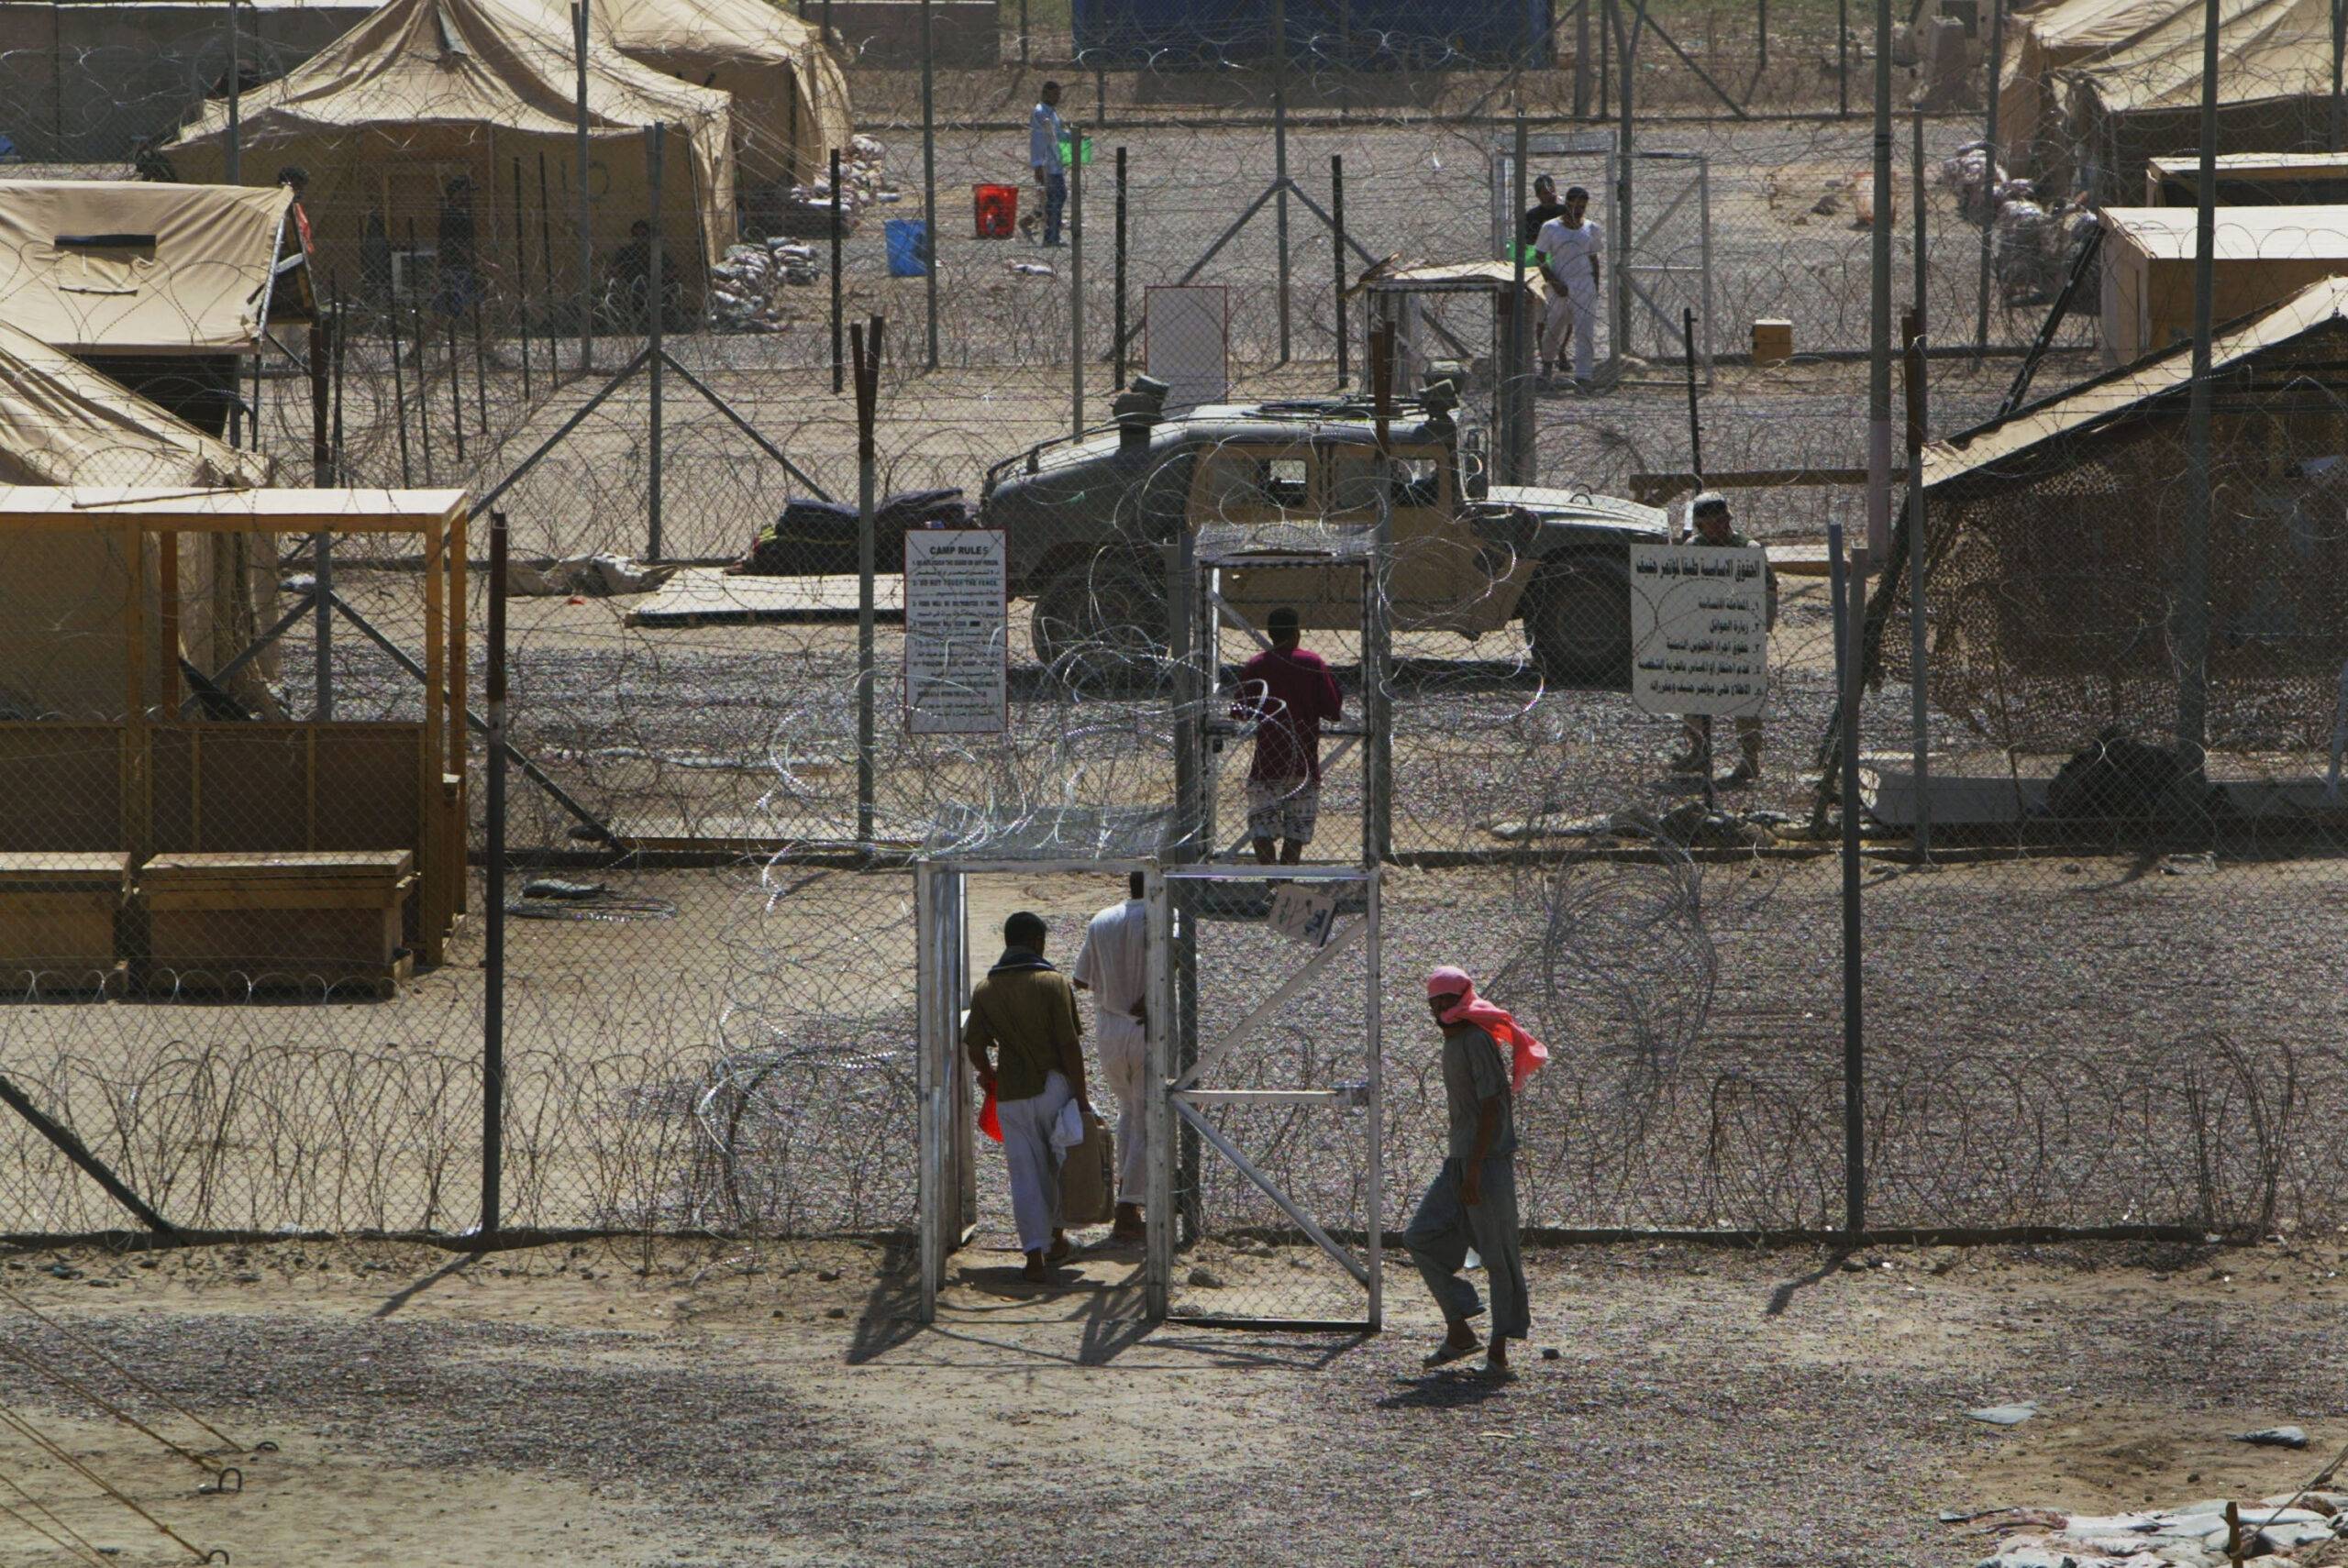 Prisoners mill around in a common area where they are housed in tents, in the Abu Ghraib prison on July 15, 2004 west of Baghdad, Iraq [Joe Raedle/Getty Images]